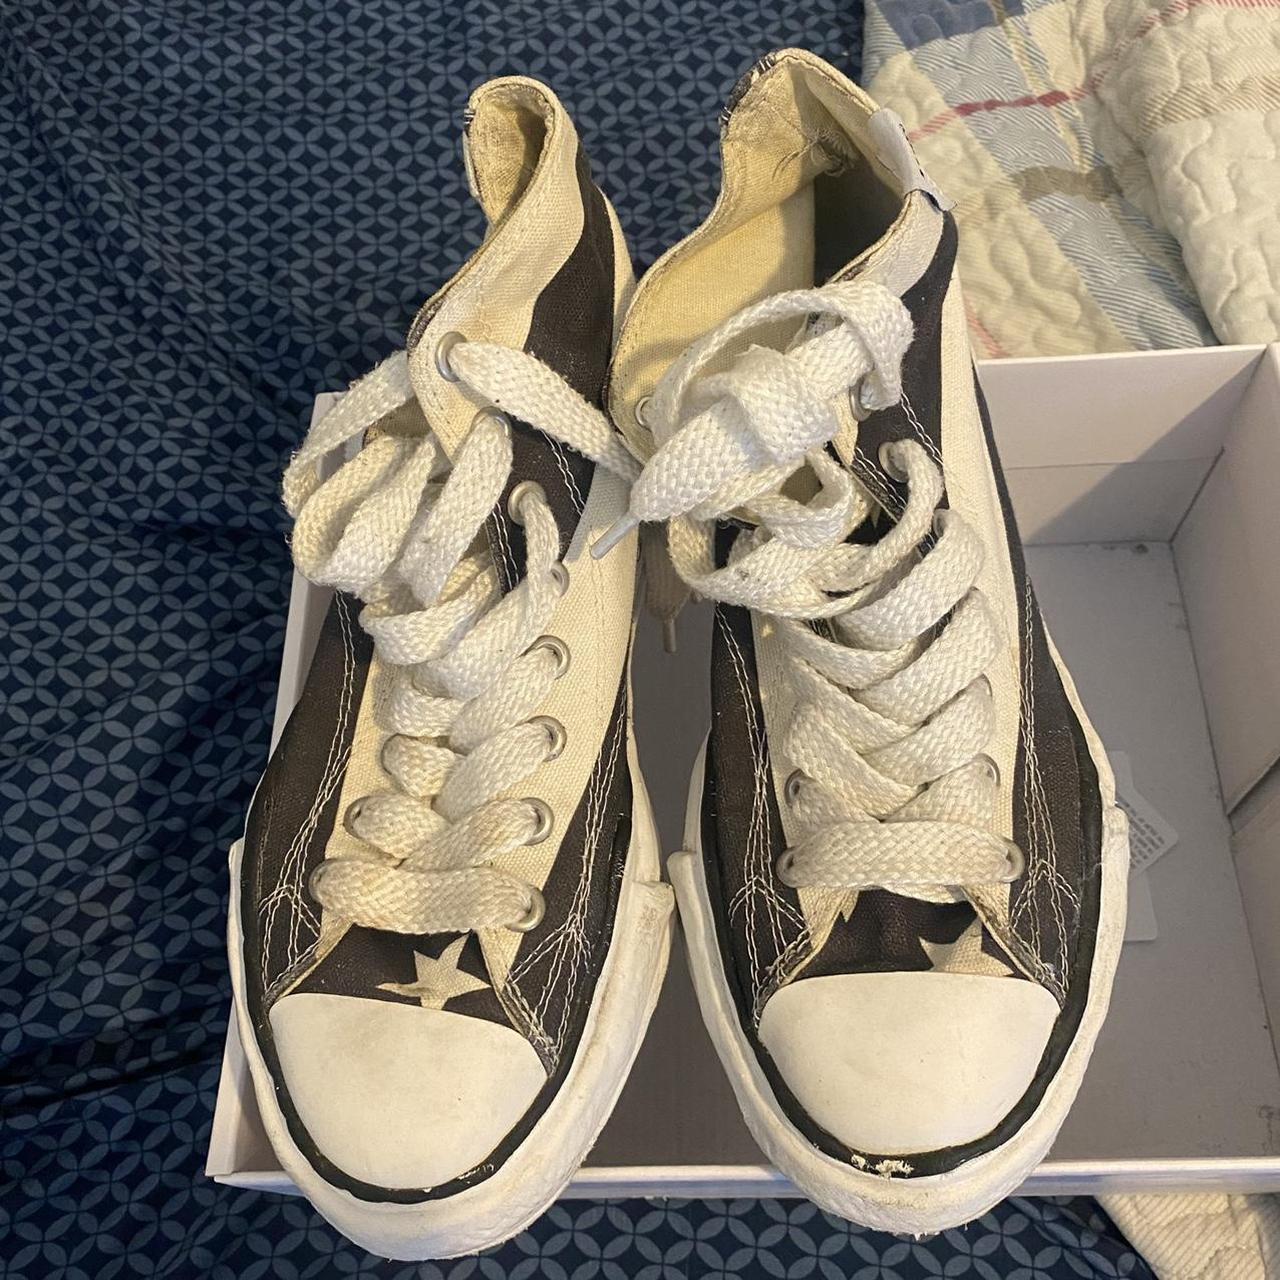 Maison Mihara Melted Sole High Top Sneakers 7.5/10... - Depop